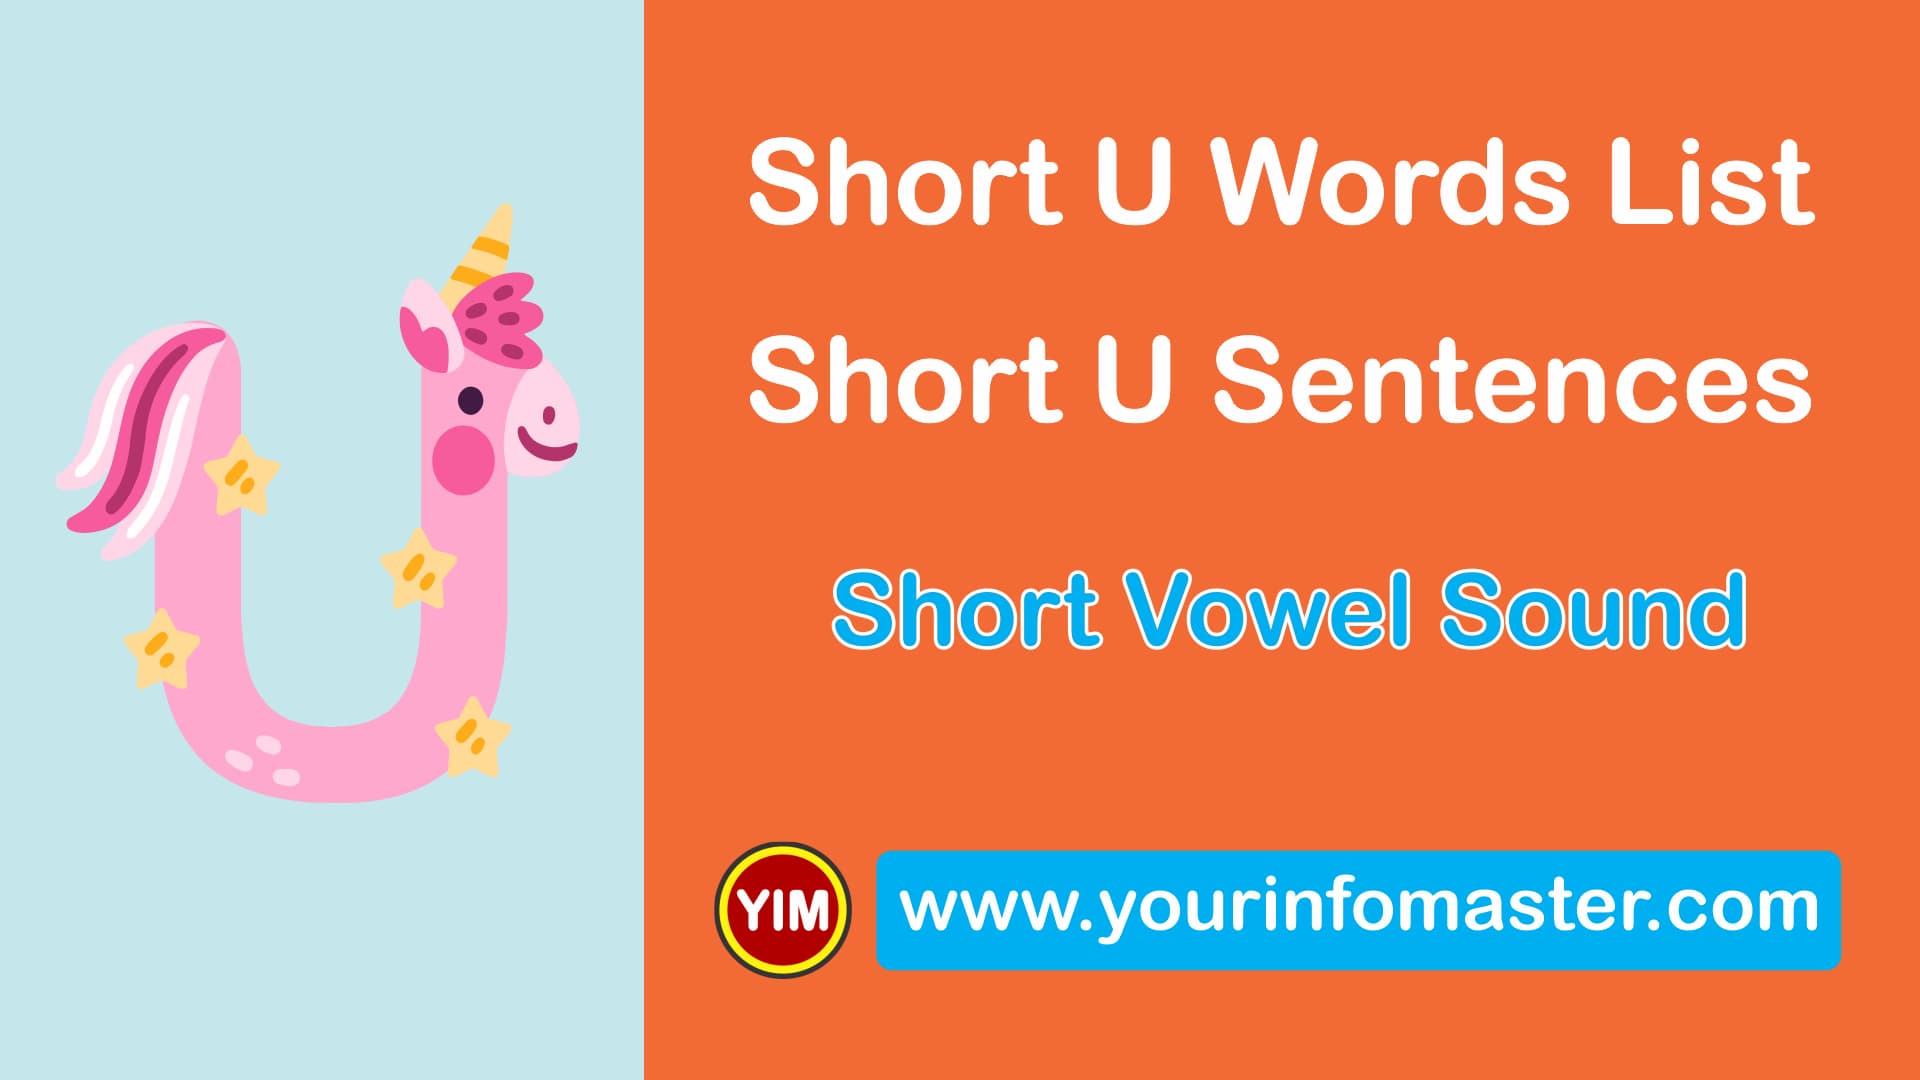 awesome words, cool short words, cool words, Learning Spellings, Long versus Short Vowels, short U sound words, short U words, Short U Words List, Short U Words Worksheets, Short Vowel, Short Vowel Examples, Short Vowel Sound, Short Vowel Sounds Examples, U words, Using Short Vowel Sounds, Vowel Pronunciation, Vowel U Sound, What is a Vowel, word of the day for kids